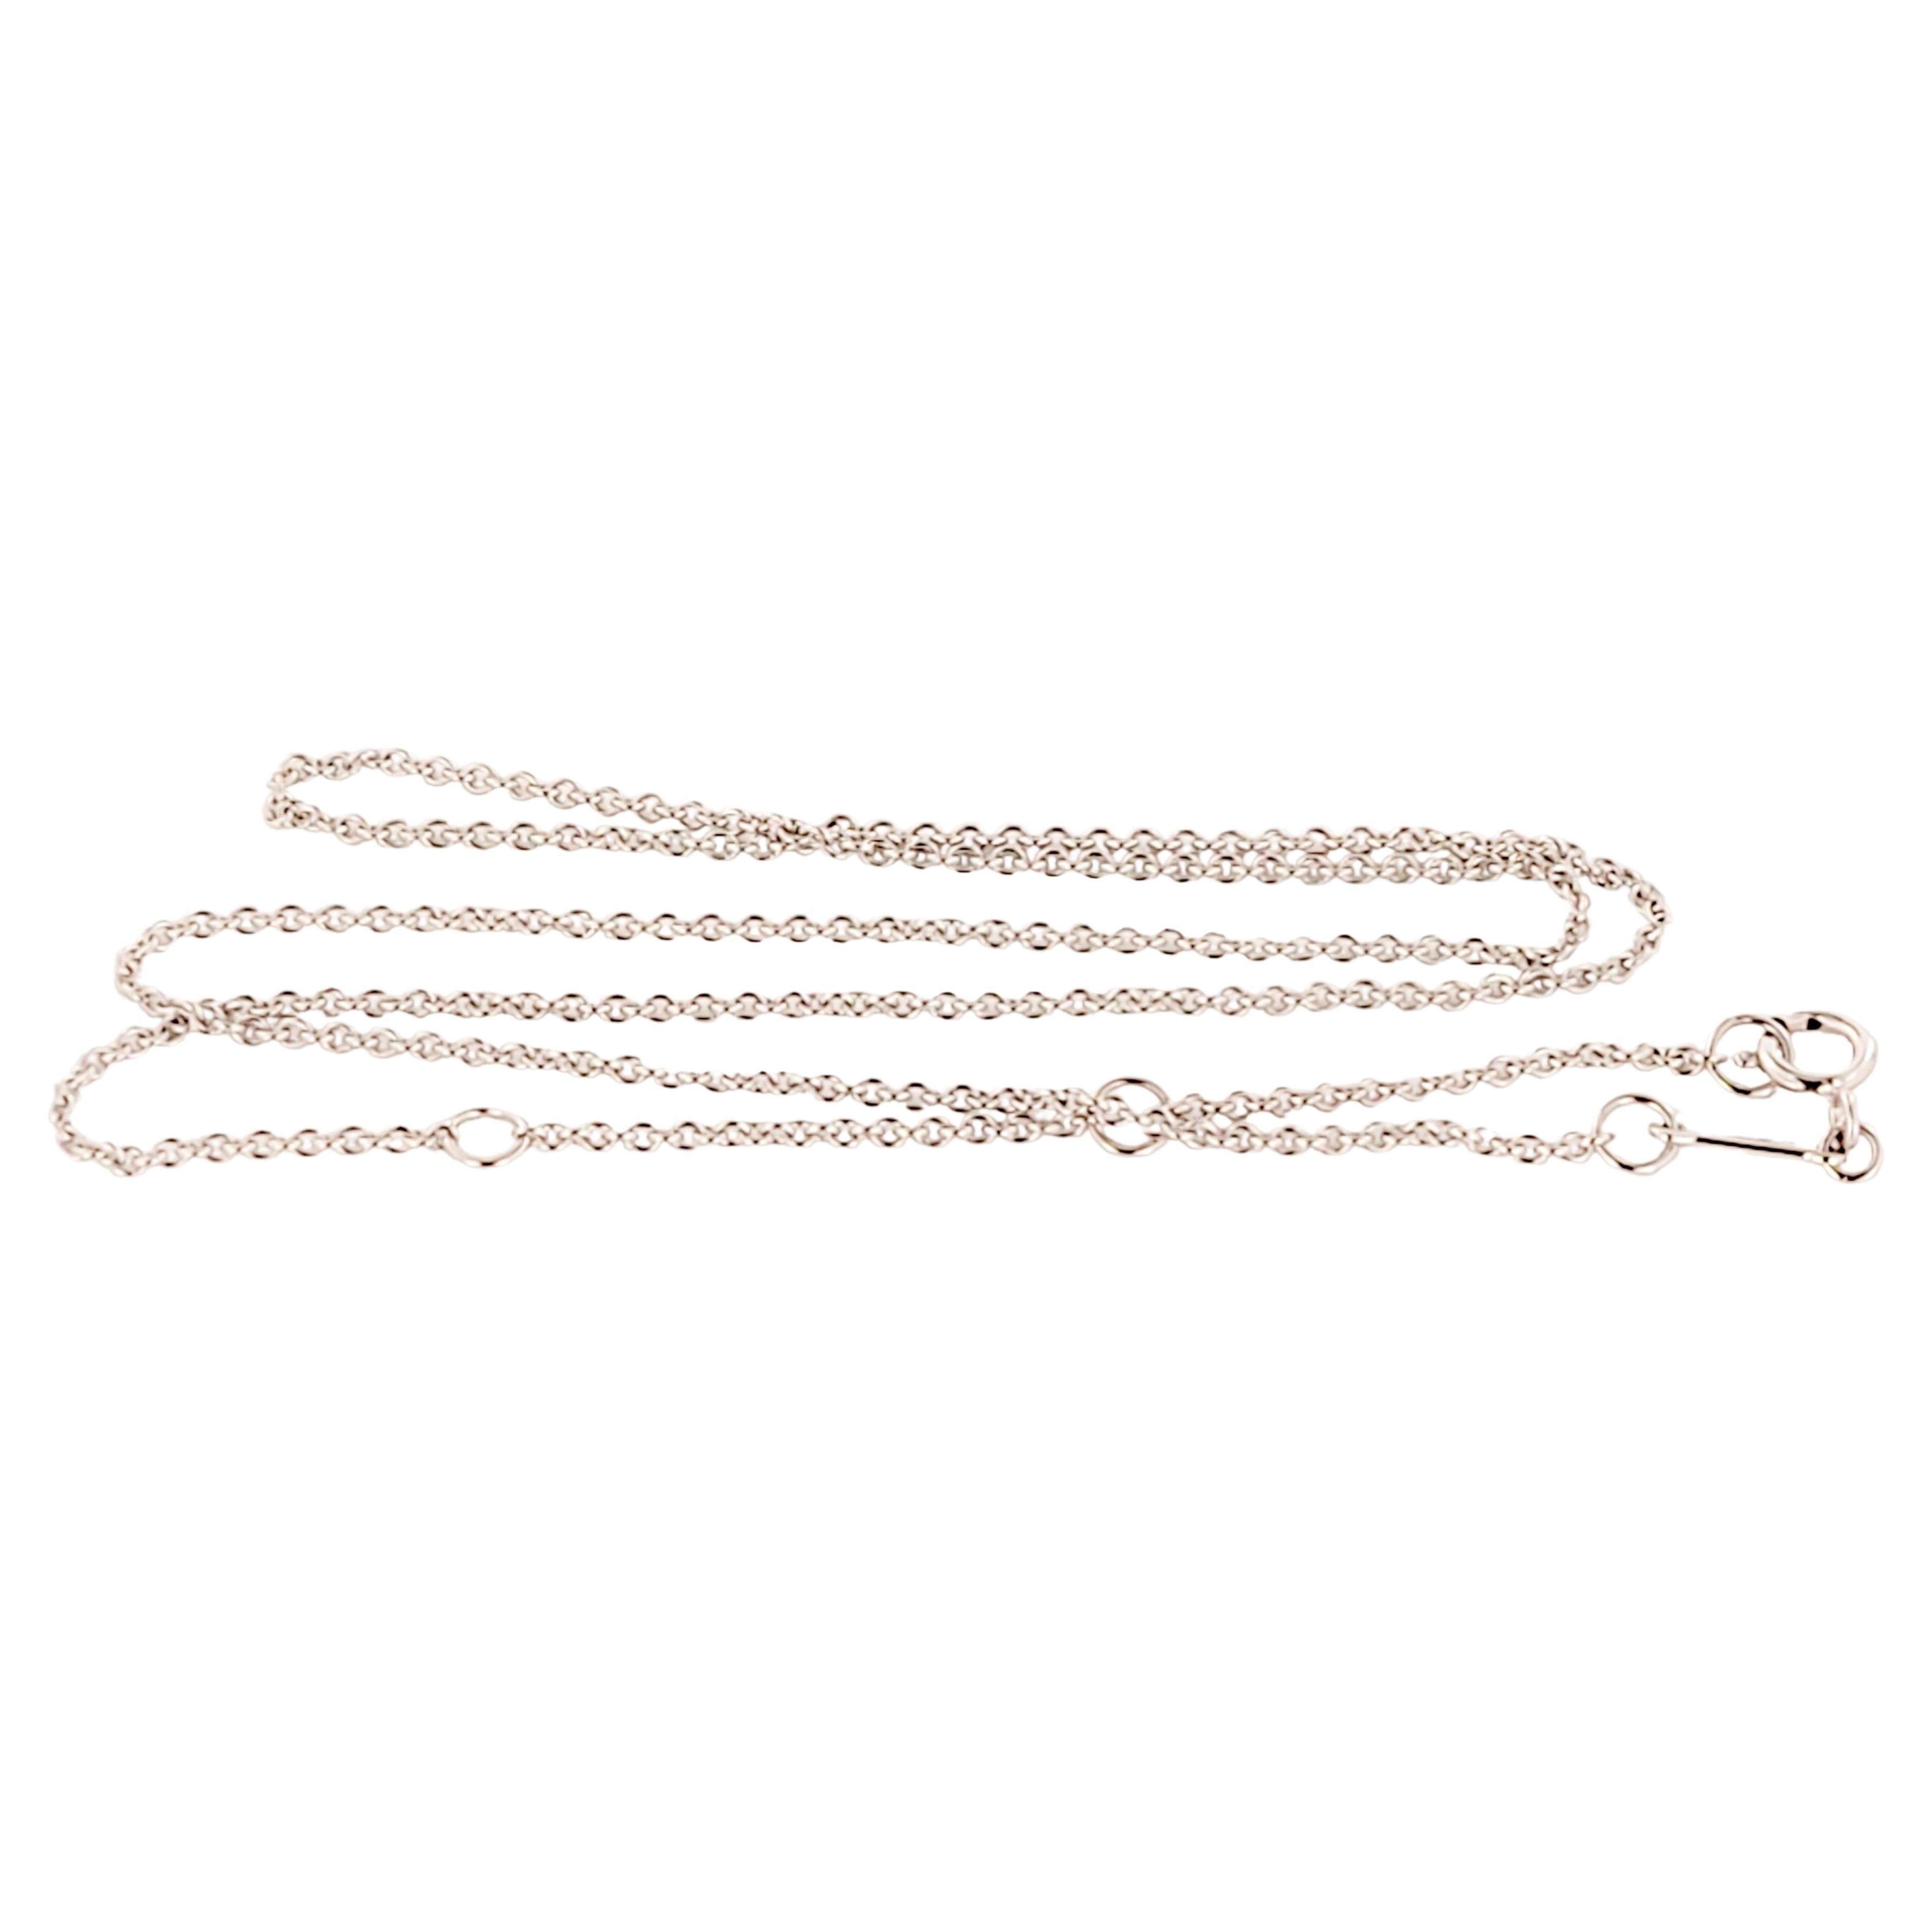 Paloma Picasso Tiffany & co
Material Platinum 950
Chain Length 16'' Long 
Adjustable 16'' 15'' 14''
Weight 2.3 gr
Condition New,  Never Worn 
Comes with Tiffany & co pouch